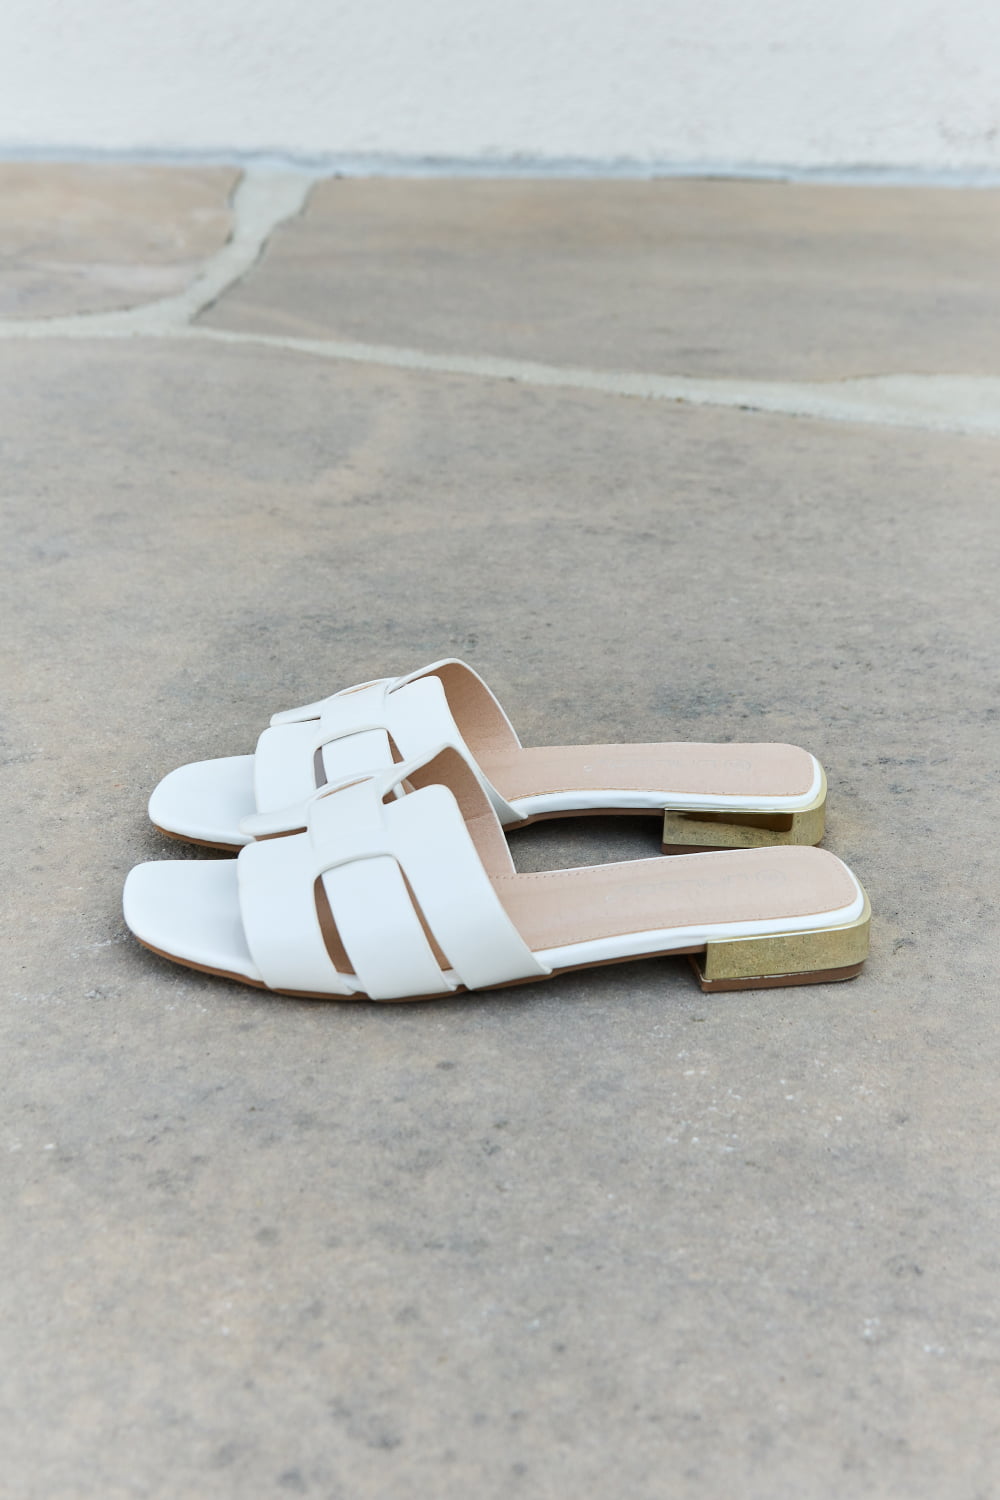 Frosty Peach Vegan Leather Women's Sandals | Hypoallergenic - Allergy Friendly - Naturally Free